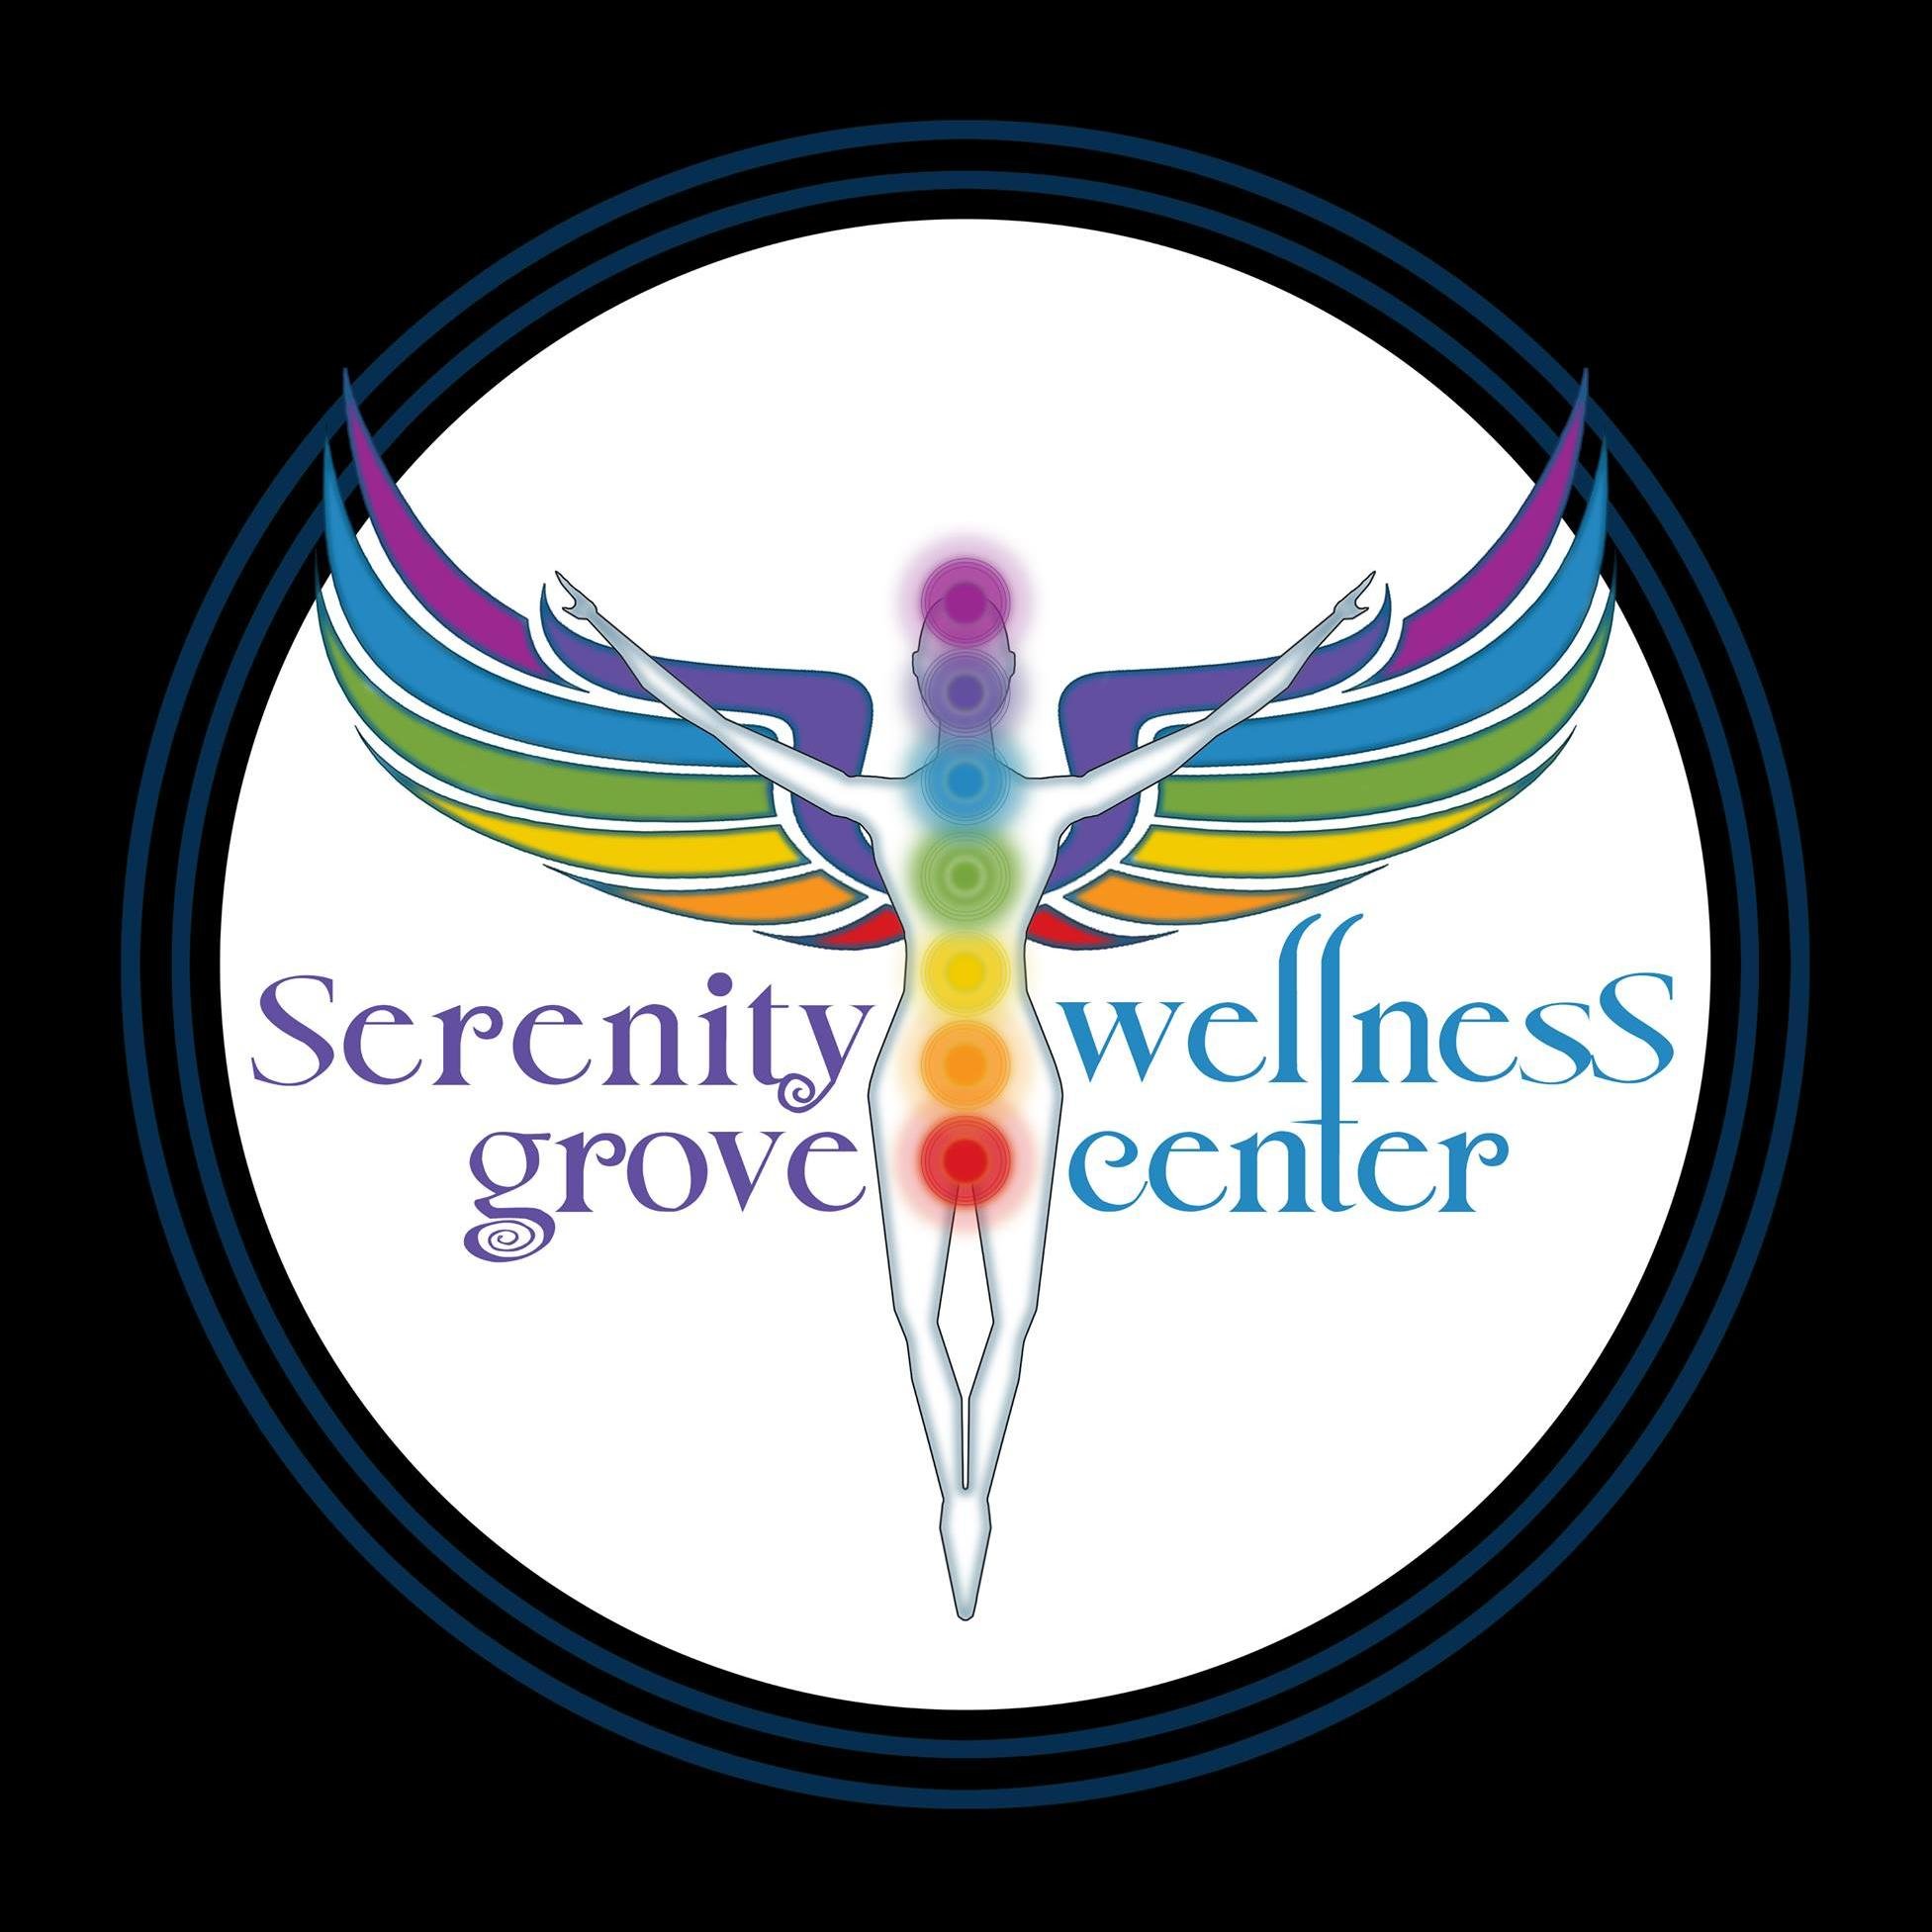 Serenity Grove Wellness Center offers Psychic, Mediumship, Animal Services, Reiki Healing, Metaphysical Ministery and Many Classes. Check out our website 3